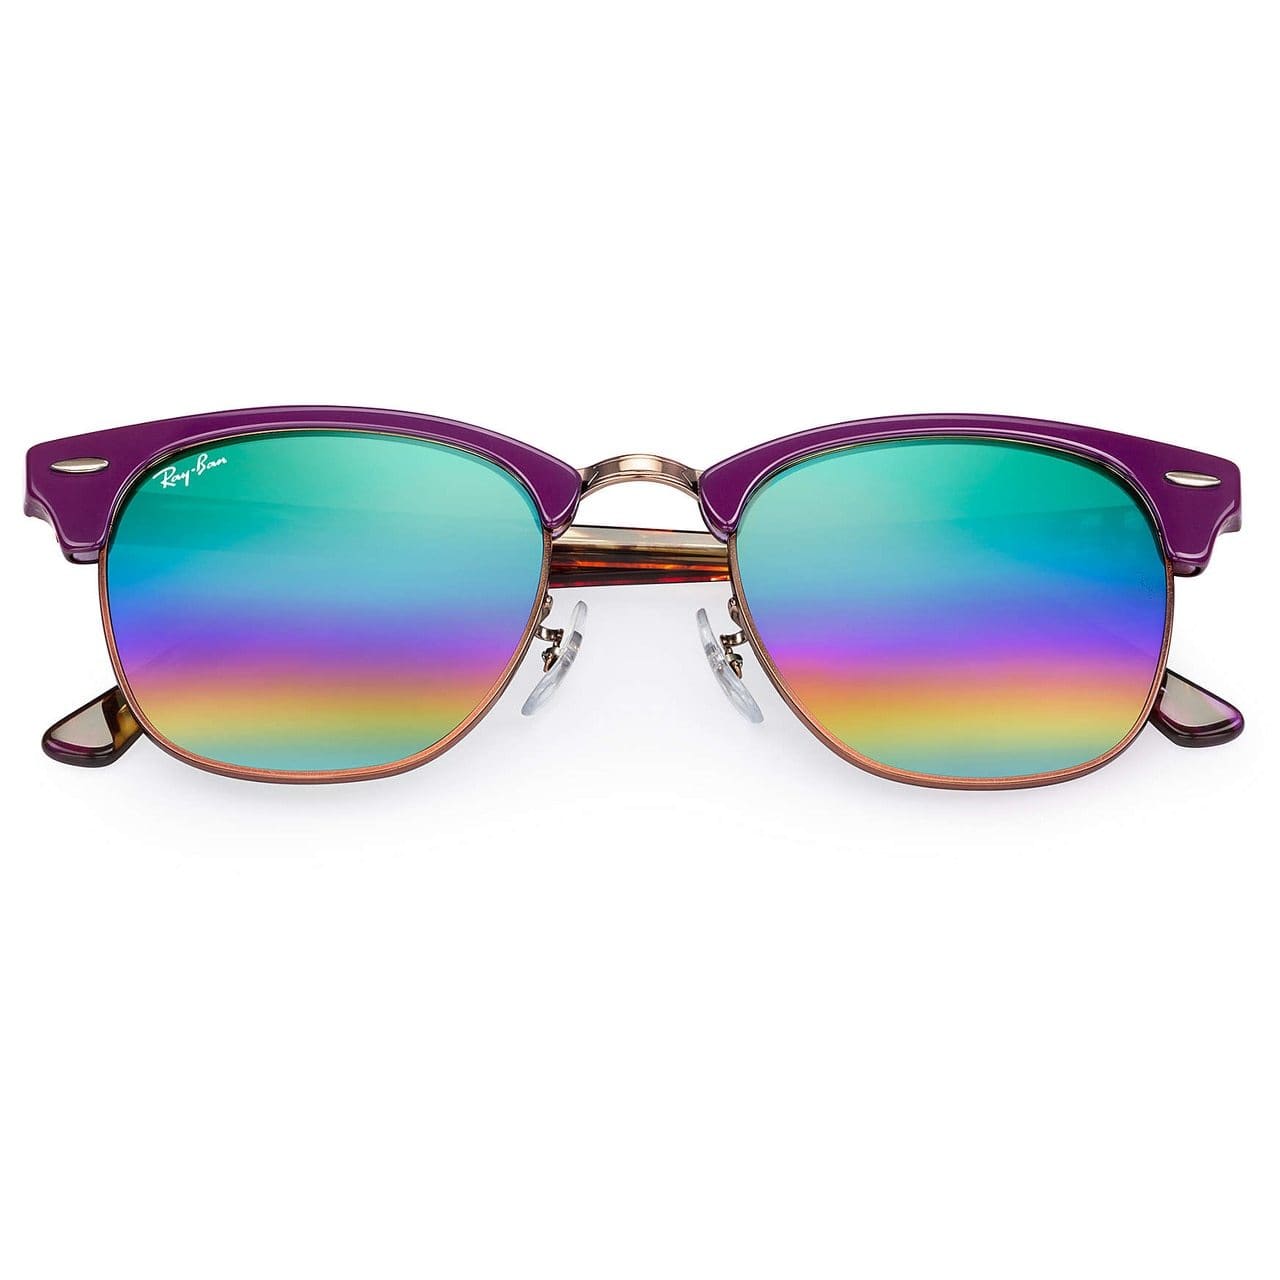 Ray-Ban RB3016-1221C3 Clubmaster Mineral Green Rainbow Flash Lens Acetate Sunglasses 8053672732030